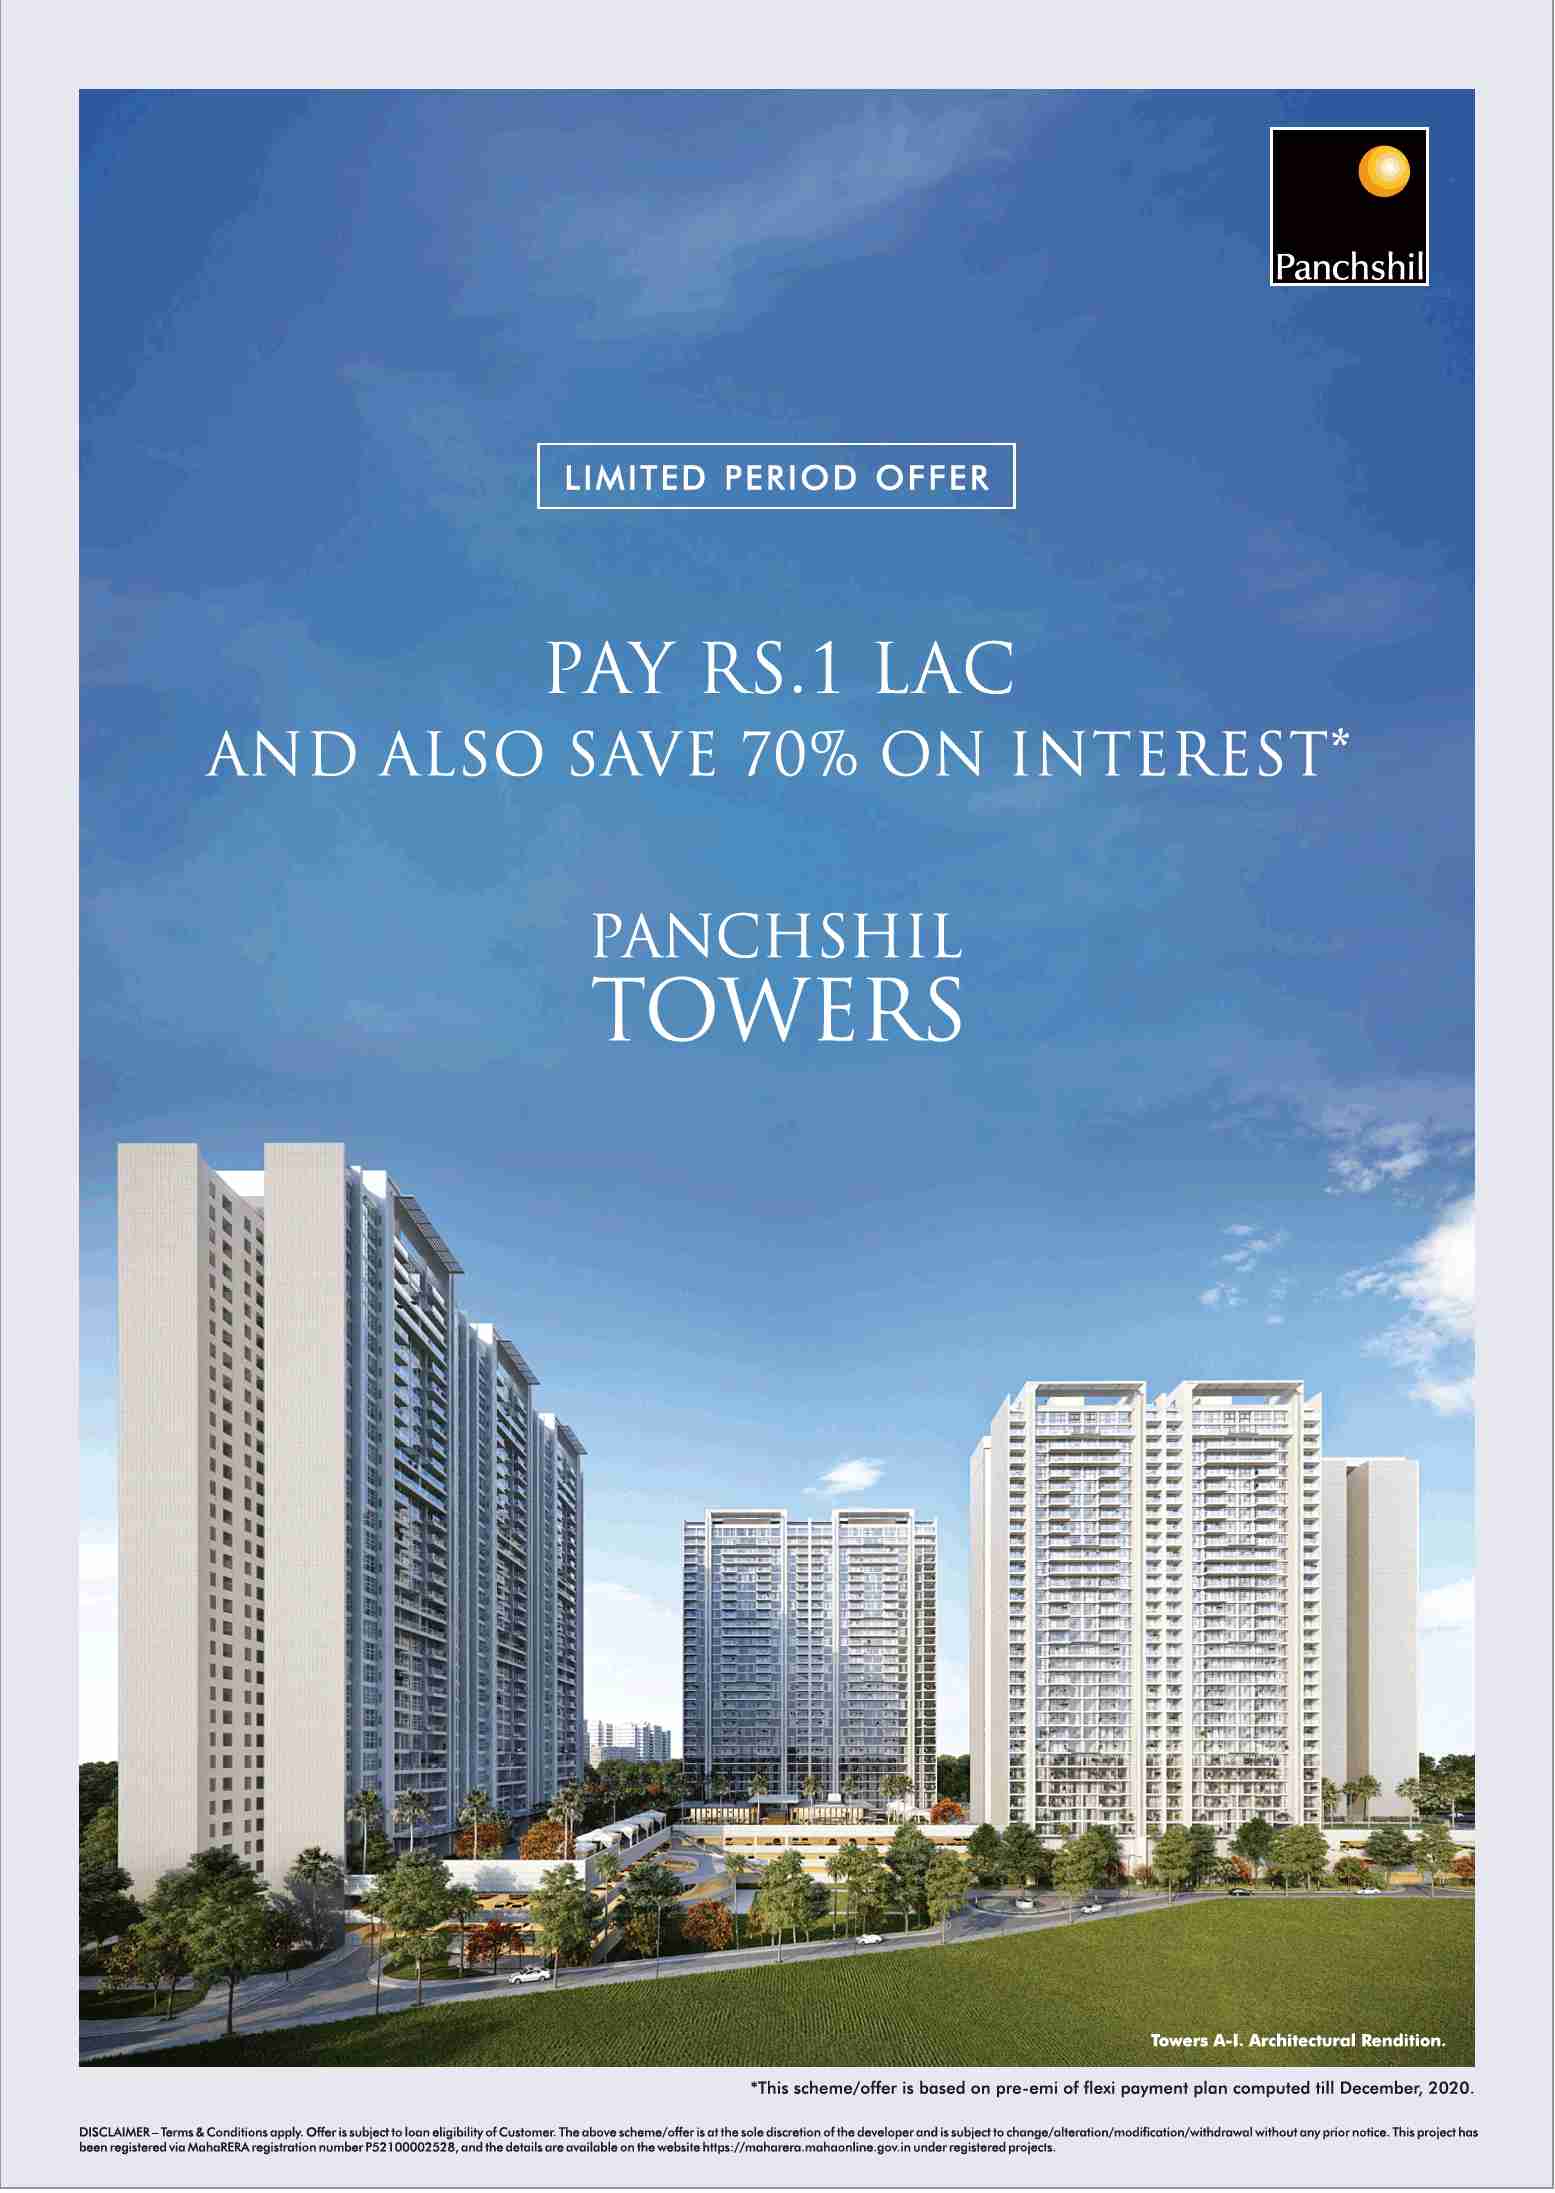 Pay Rs. 1 Lac and also save 70% on interest at Panchshil Towers in Pune Update